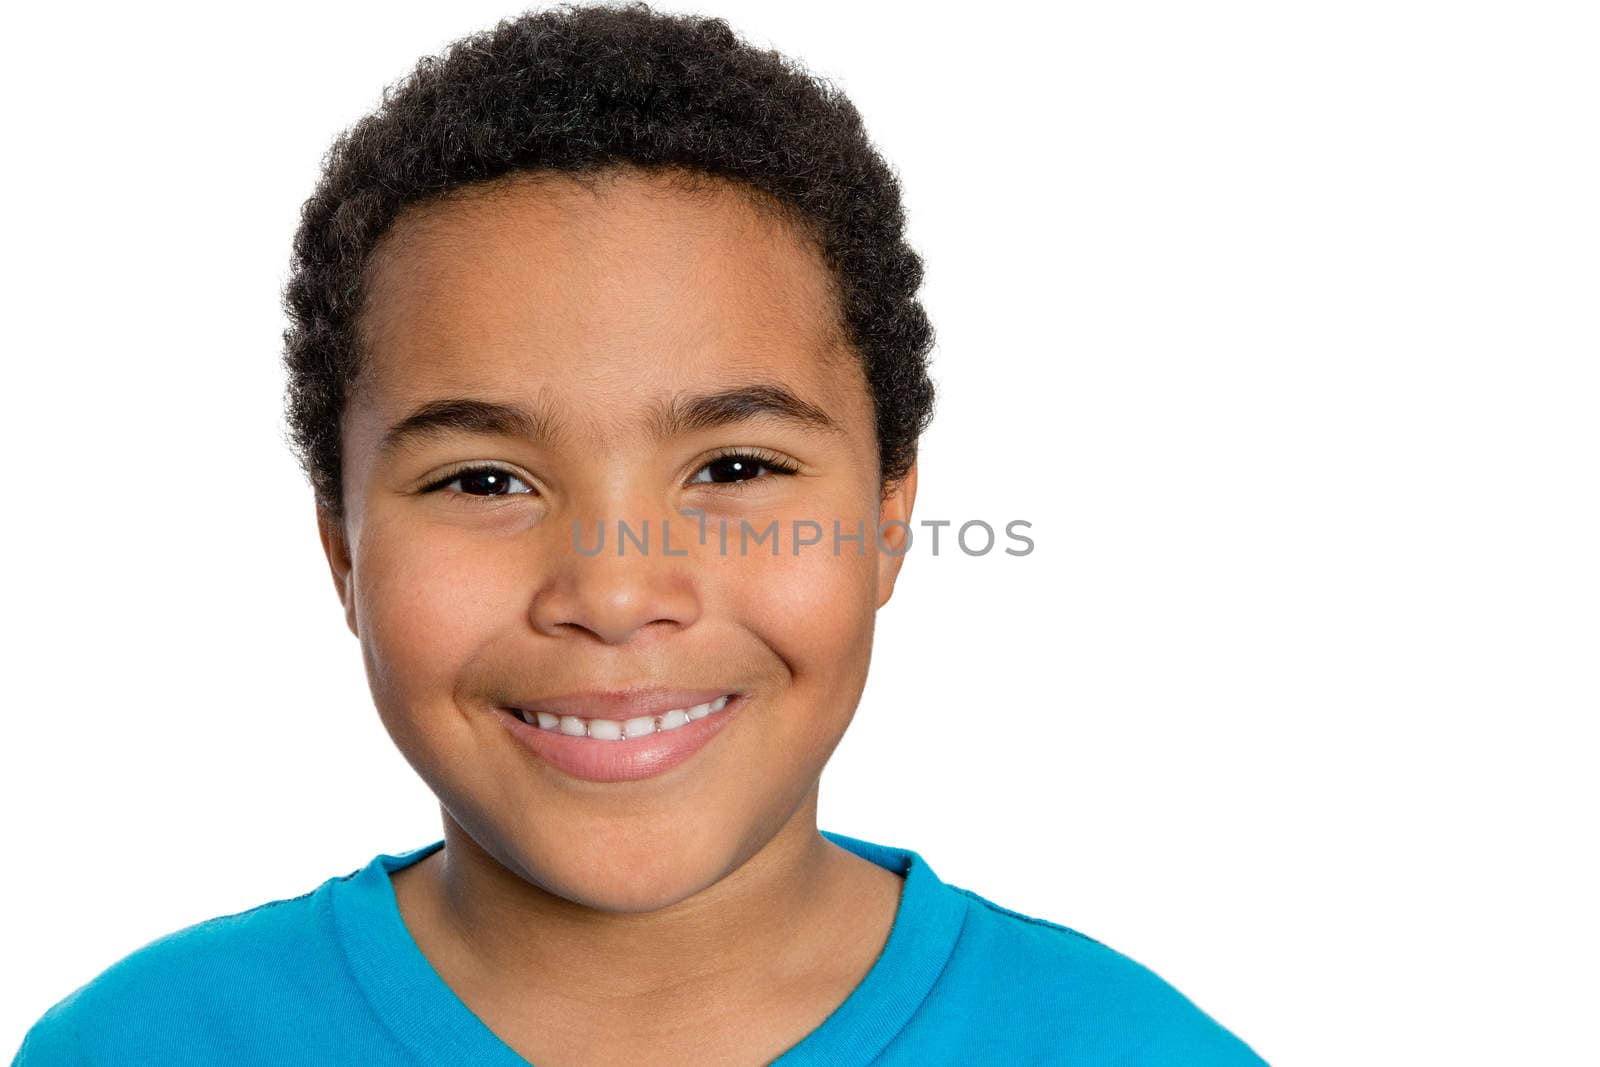 Close up Young Turkish African Boy Looking at the Camera with Happy Facial Expression Against White Background.